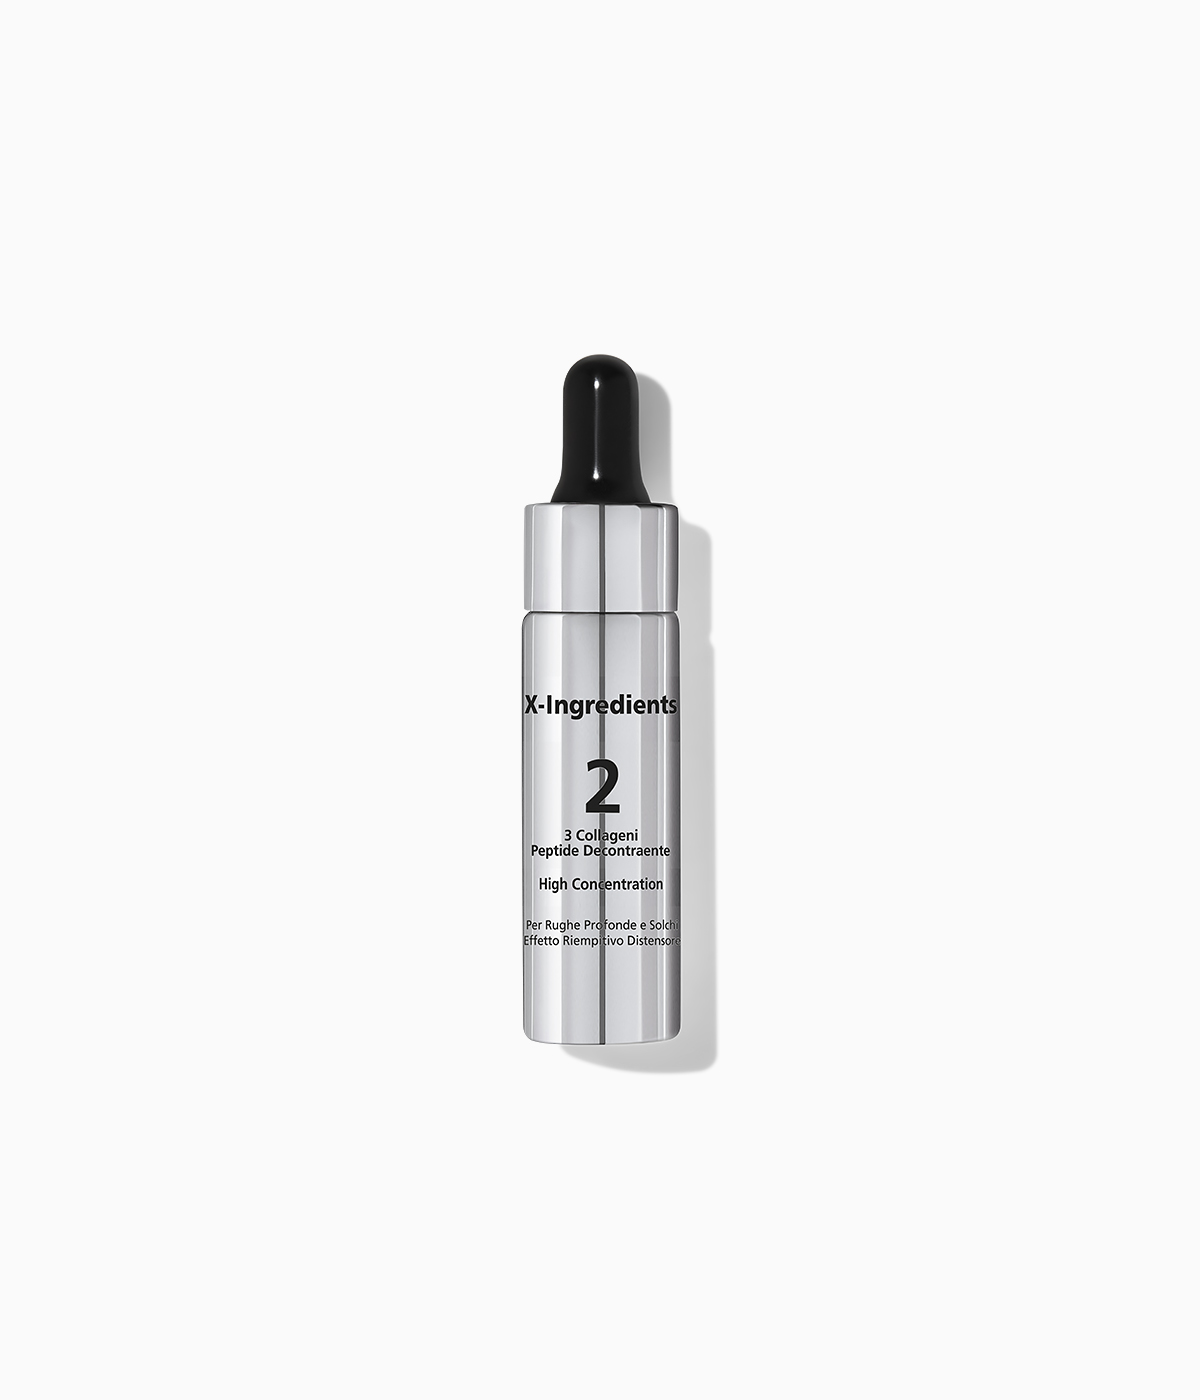 Labo X-Igredients Strong Igredient 2 for Deep Wrinkles 10ml